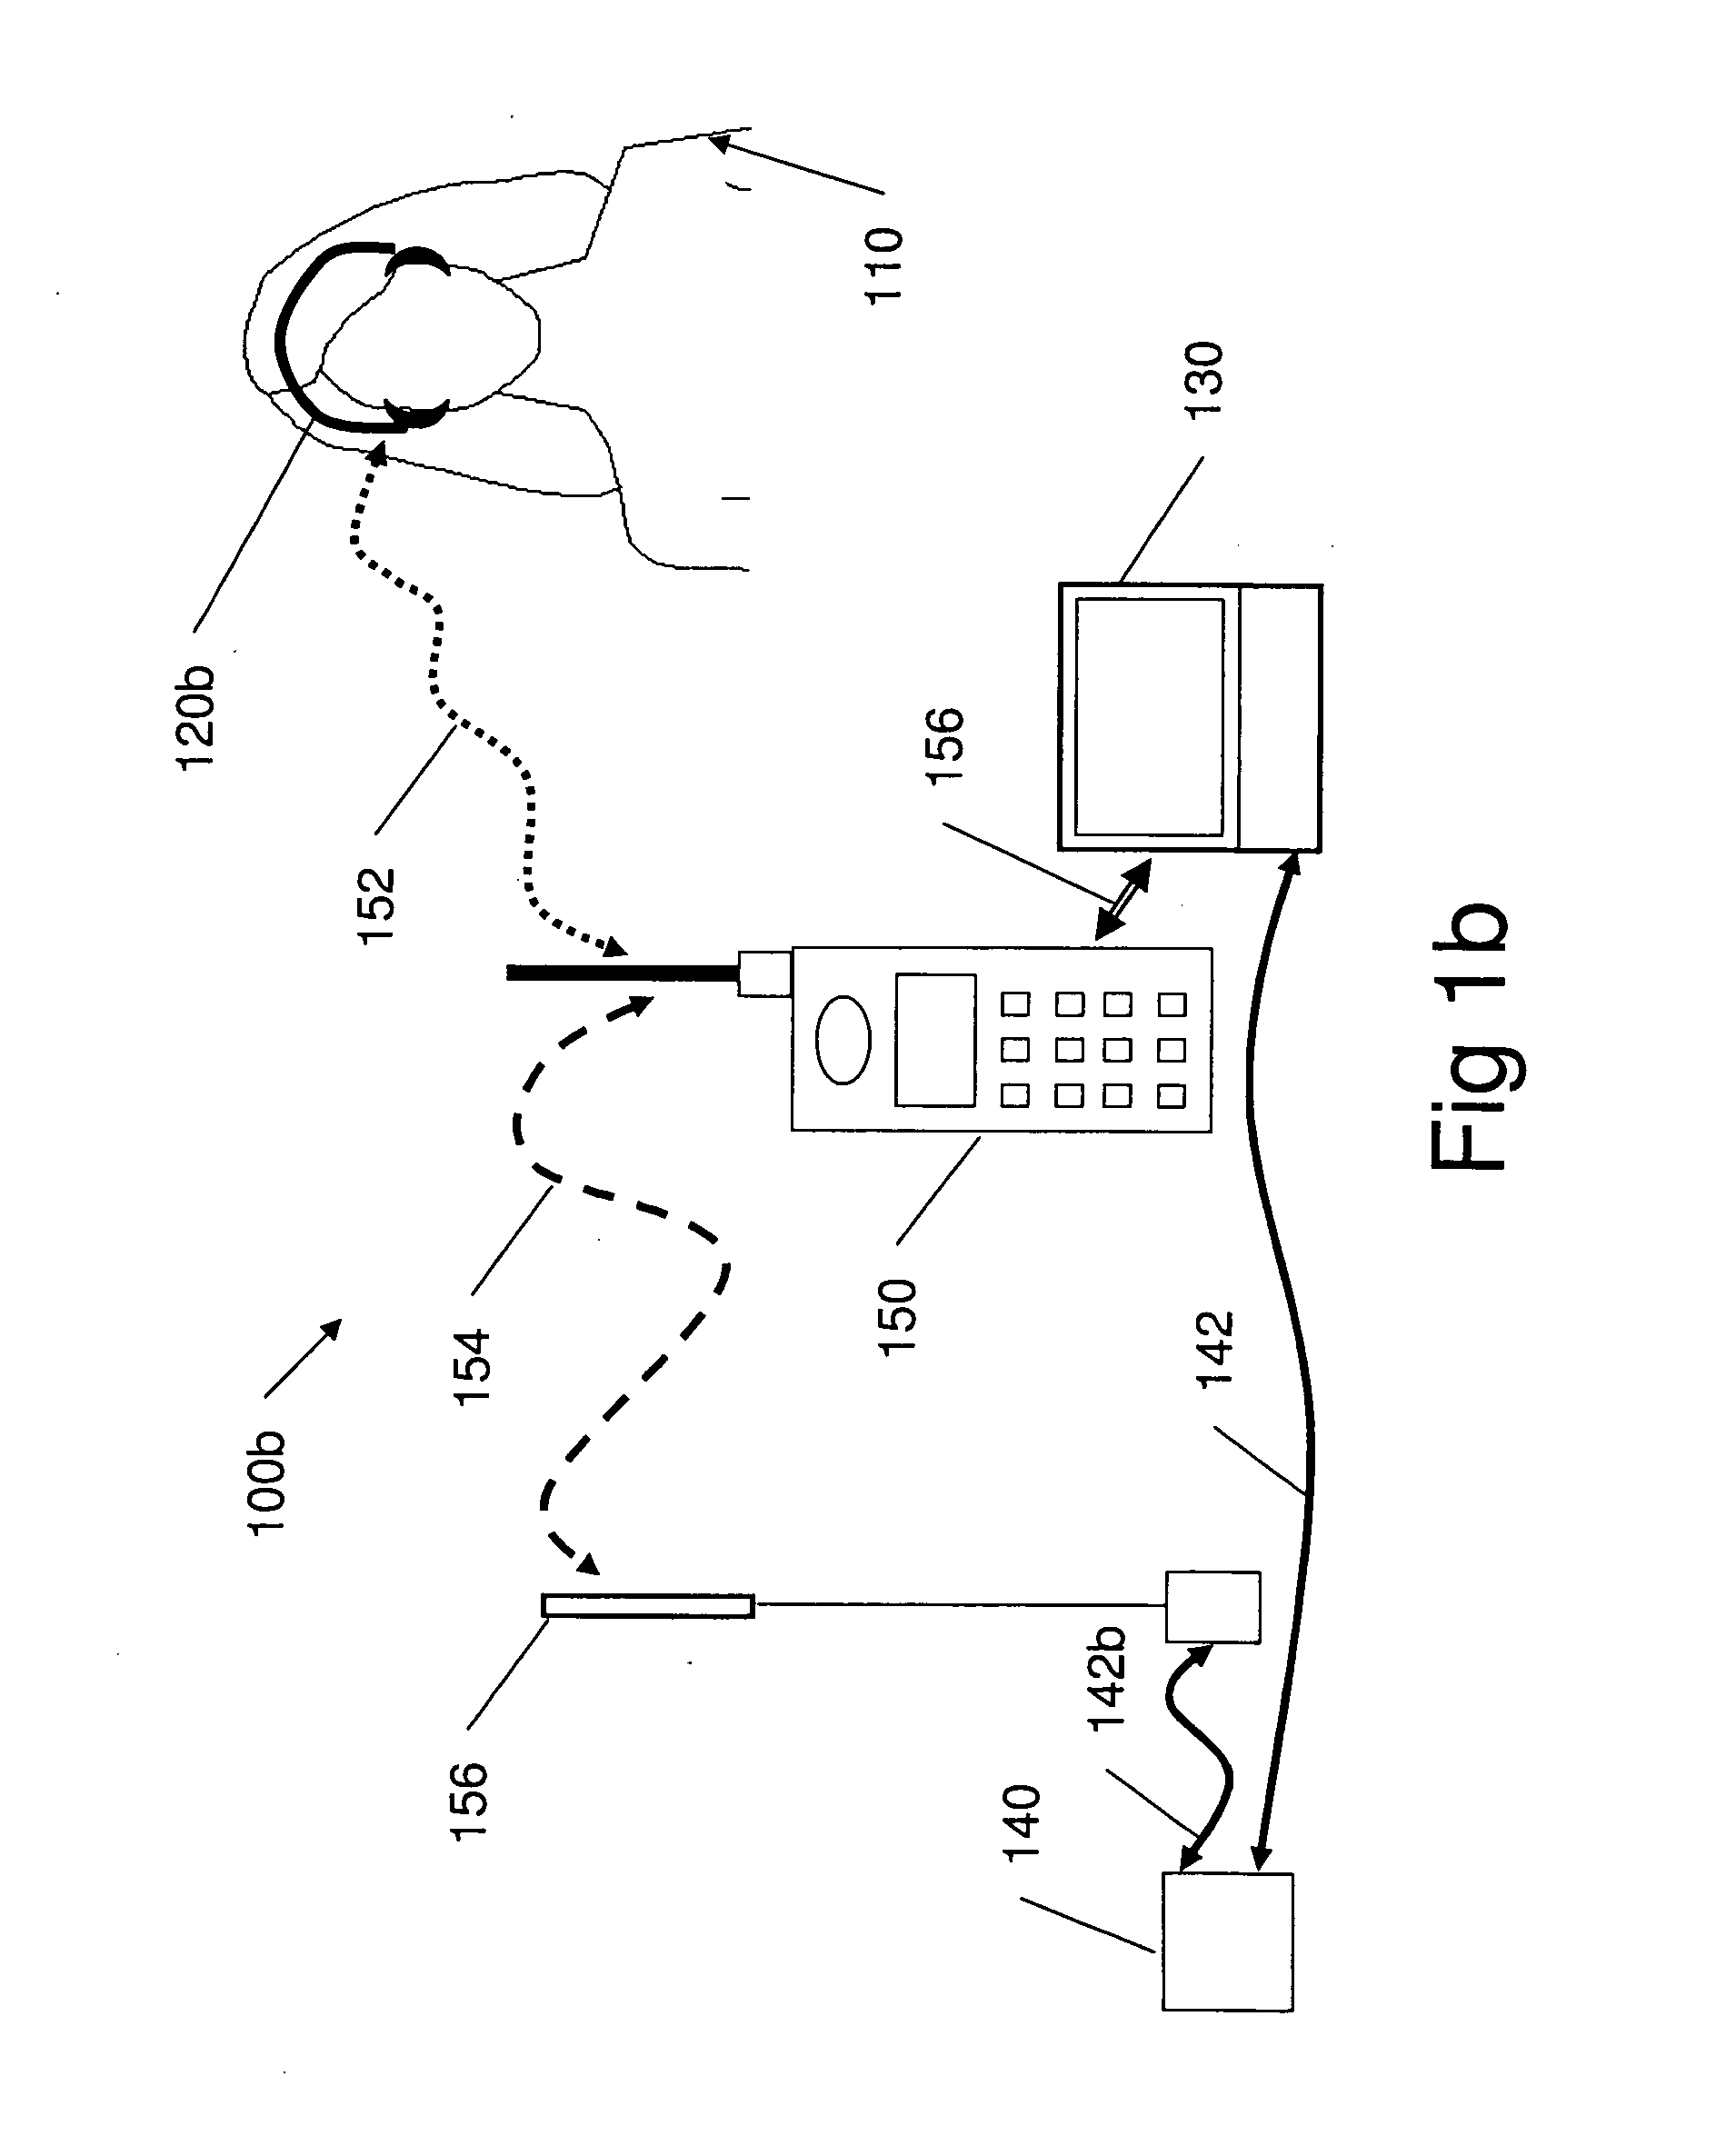 Auditory diagnosis and training system apparatus and method